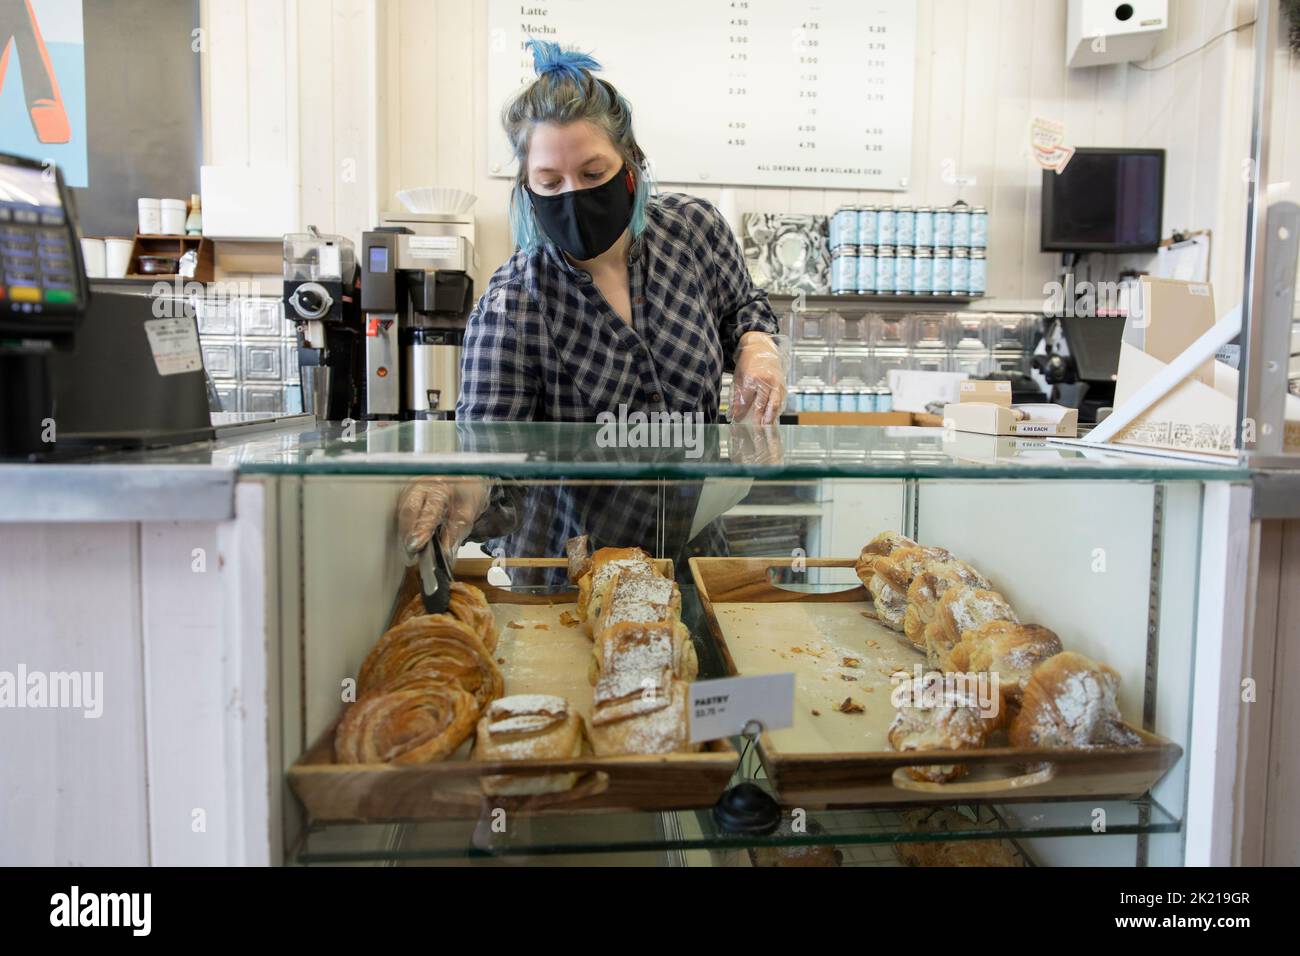 Female worker with blue hair in face mask serving pastries in cafe Stock Photo